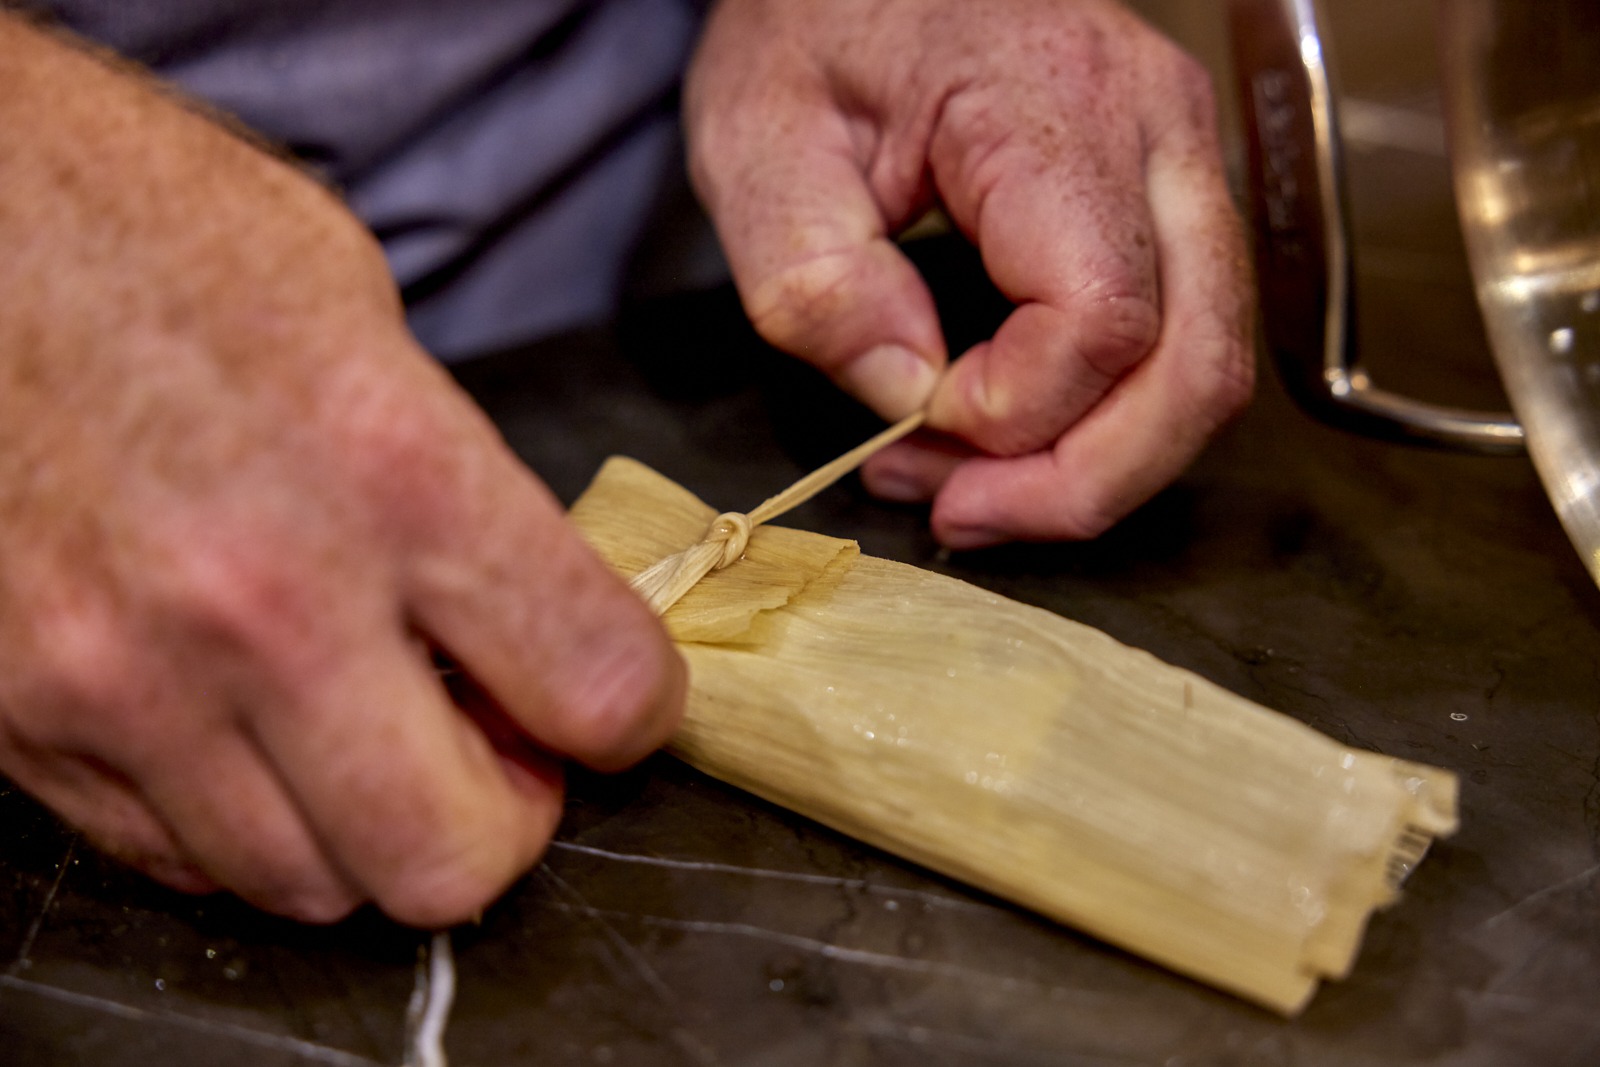 tying the tamale closed